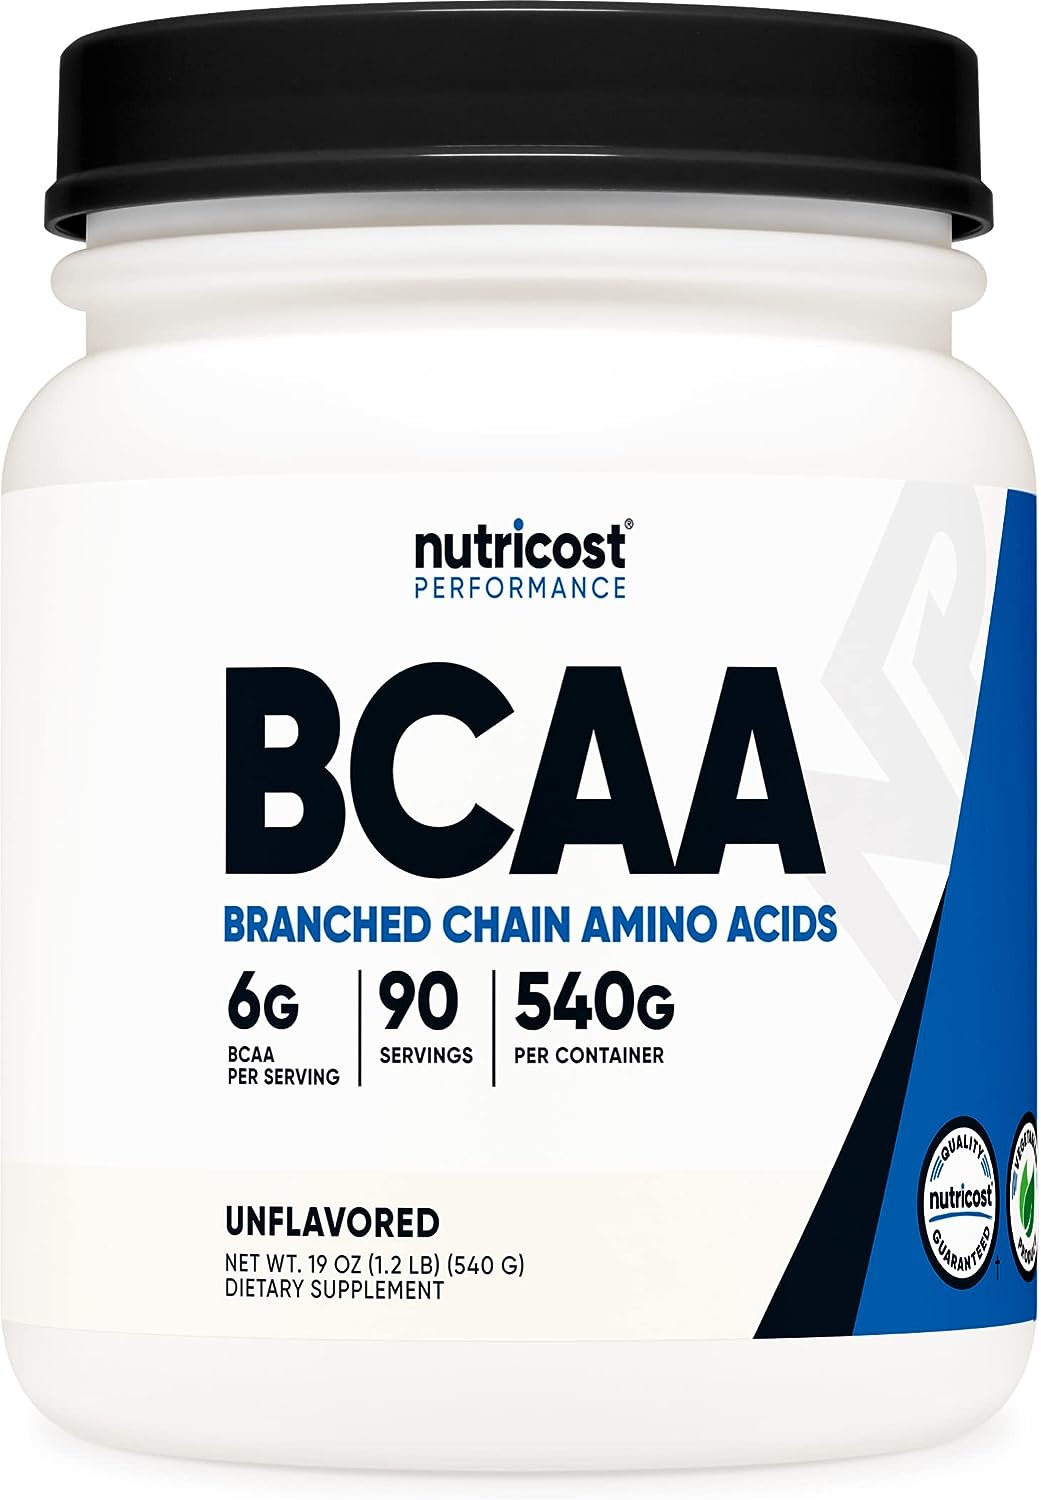 Nutricost BCAA Powder 2:1:1 (Unavored, 90 Servings) - Branched Chain Amino Acids